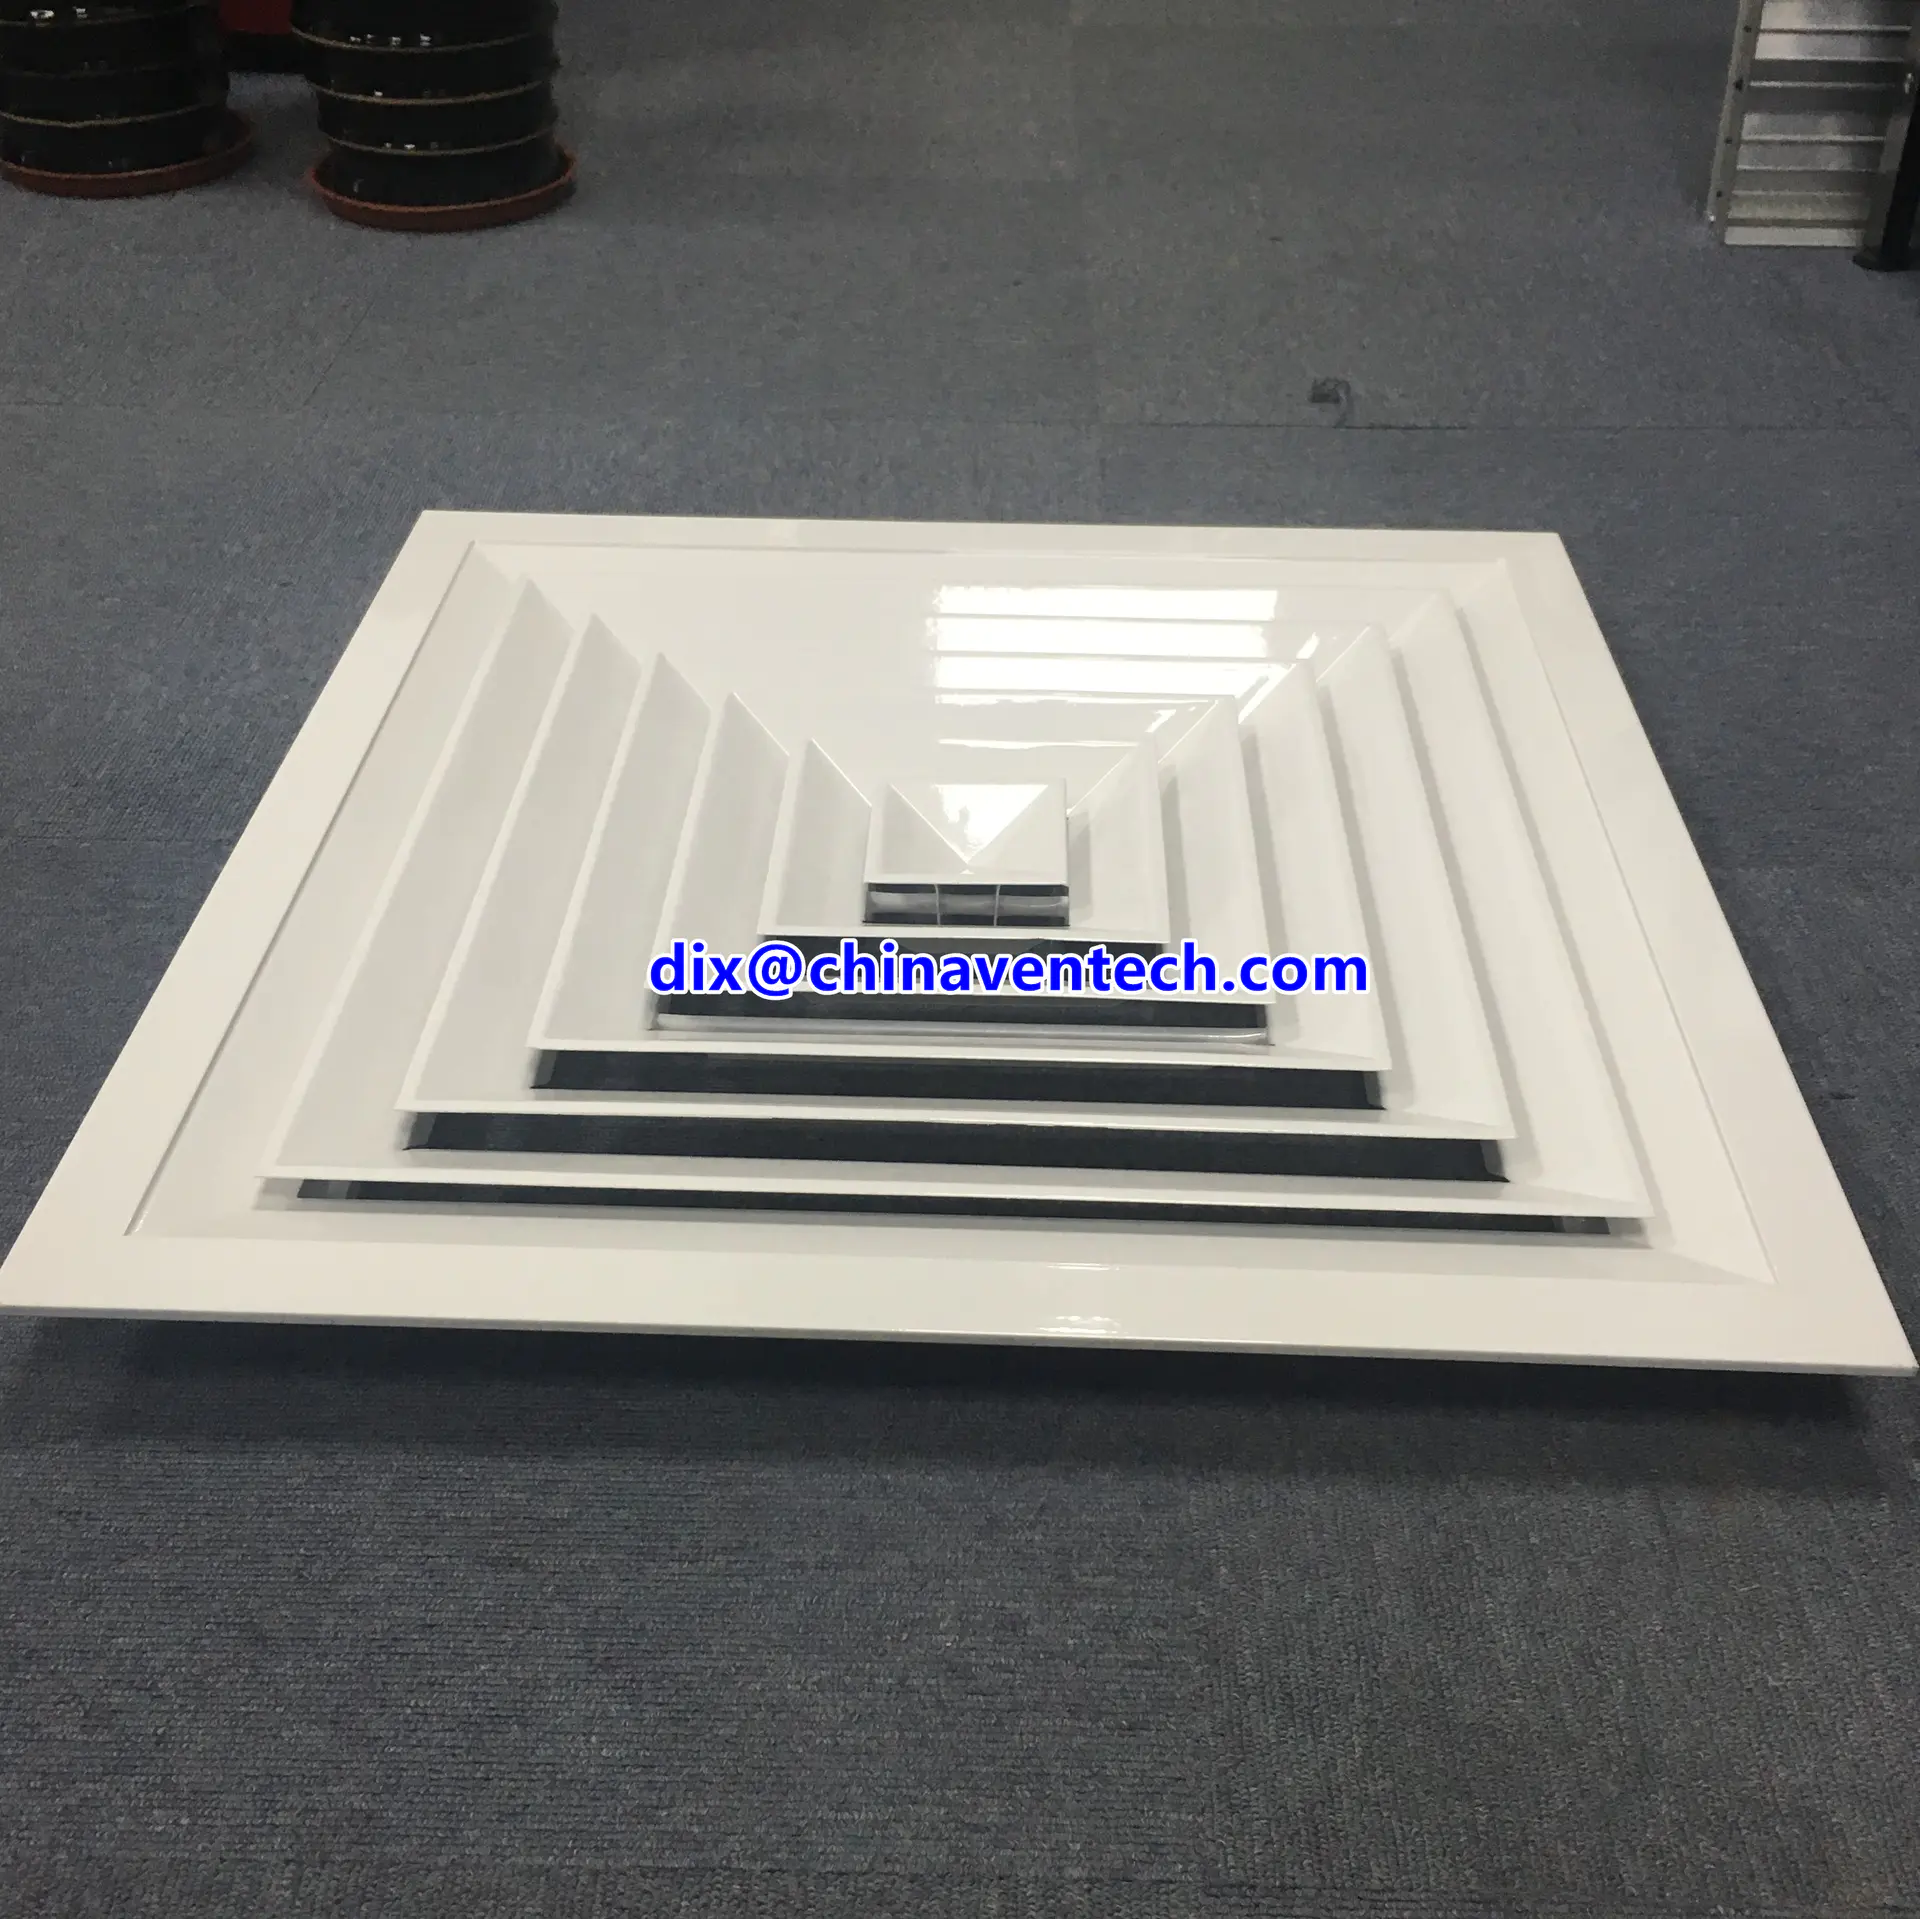 Hvac system air conditioning ceiling square 4 way air duct diffuser